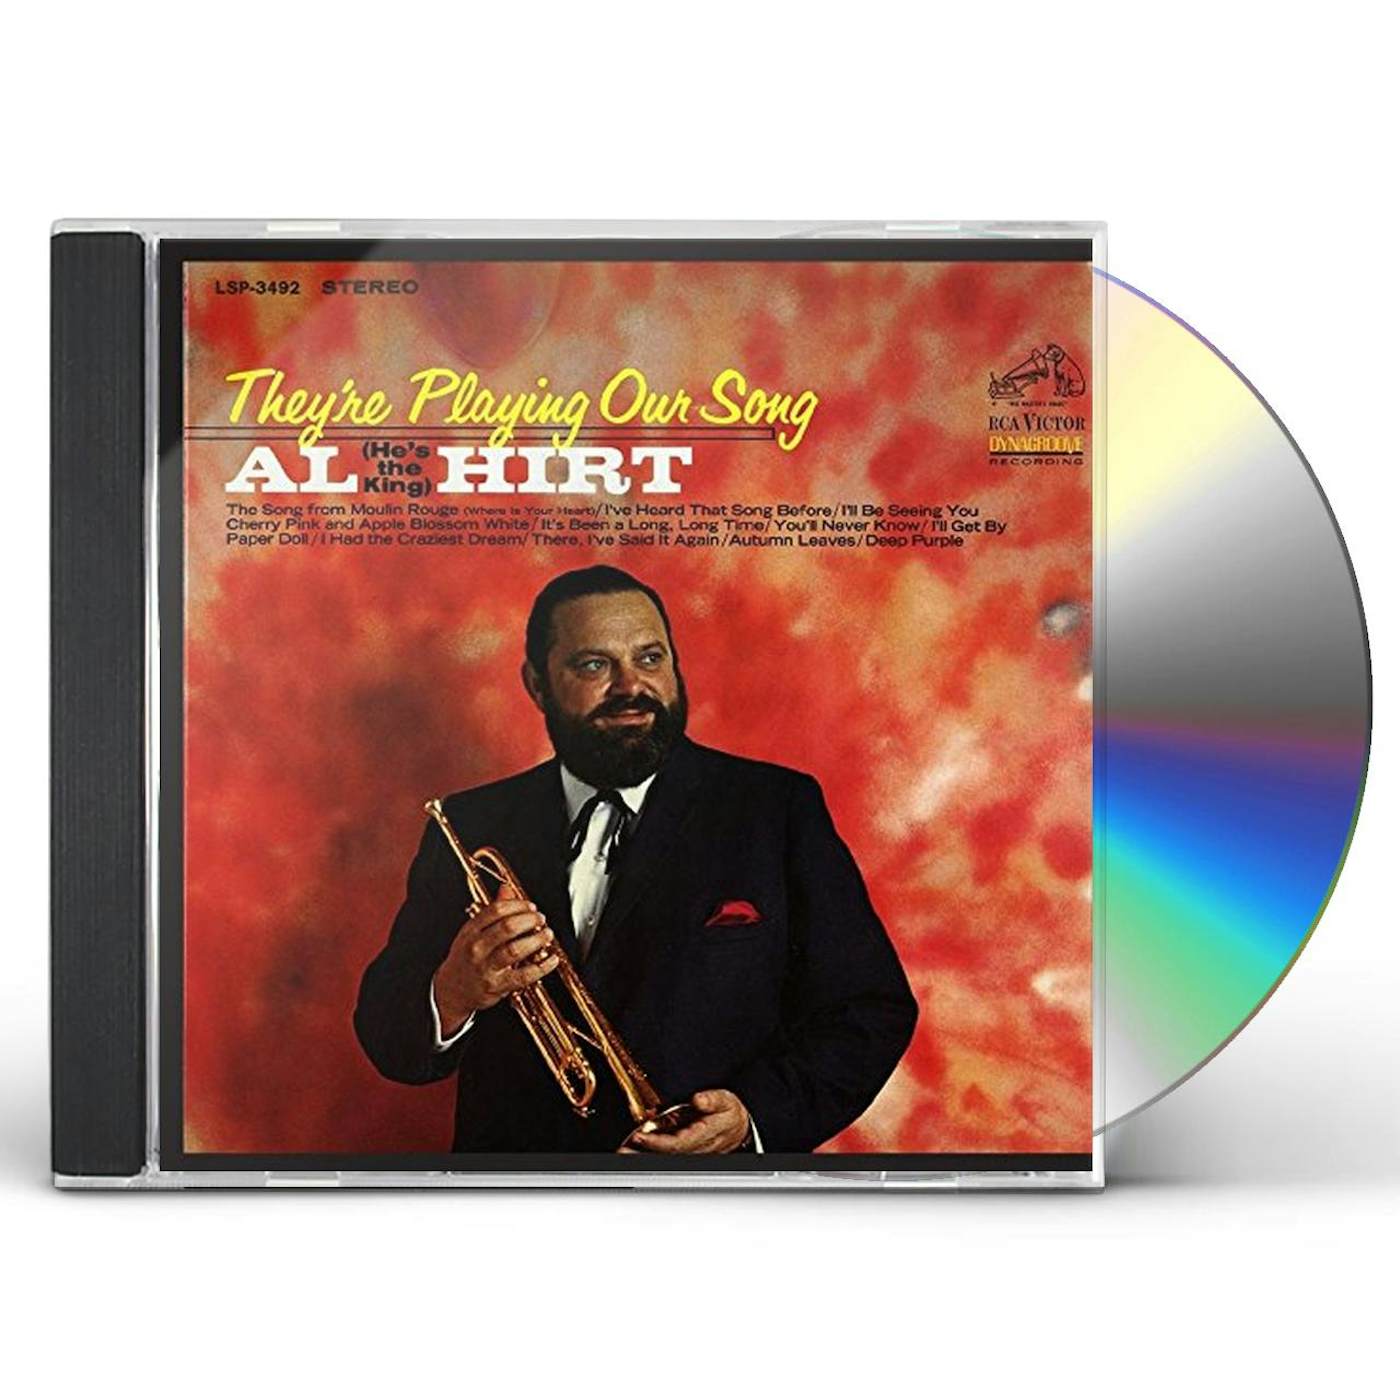 Lot of 8 Al Hirt Vinyl, LP The Greatest Horn In The World Al (He's The King)